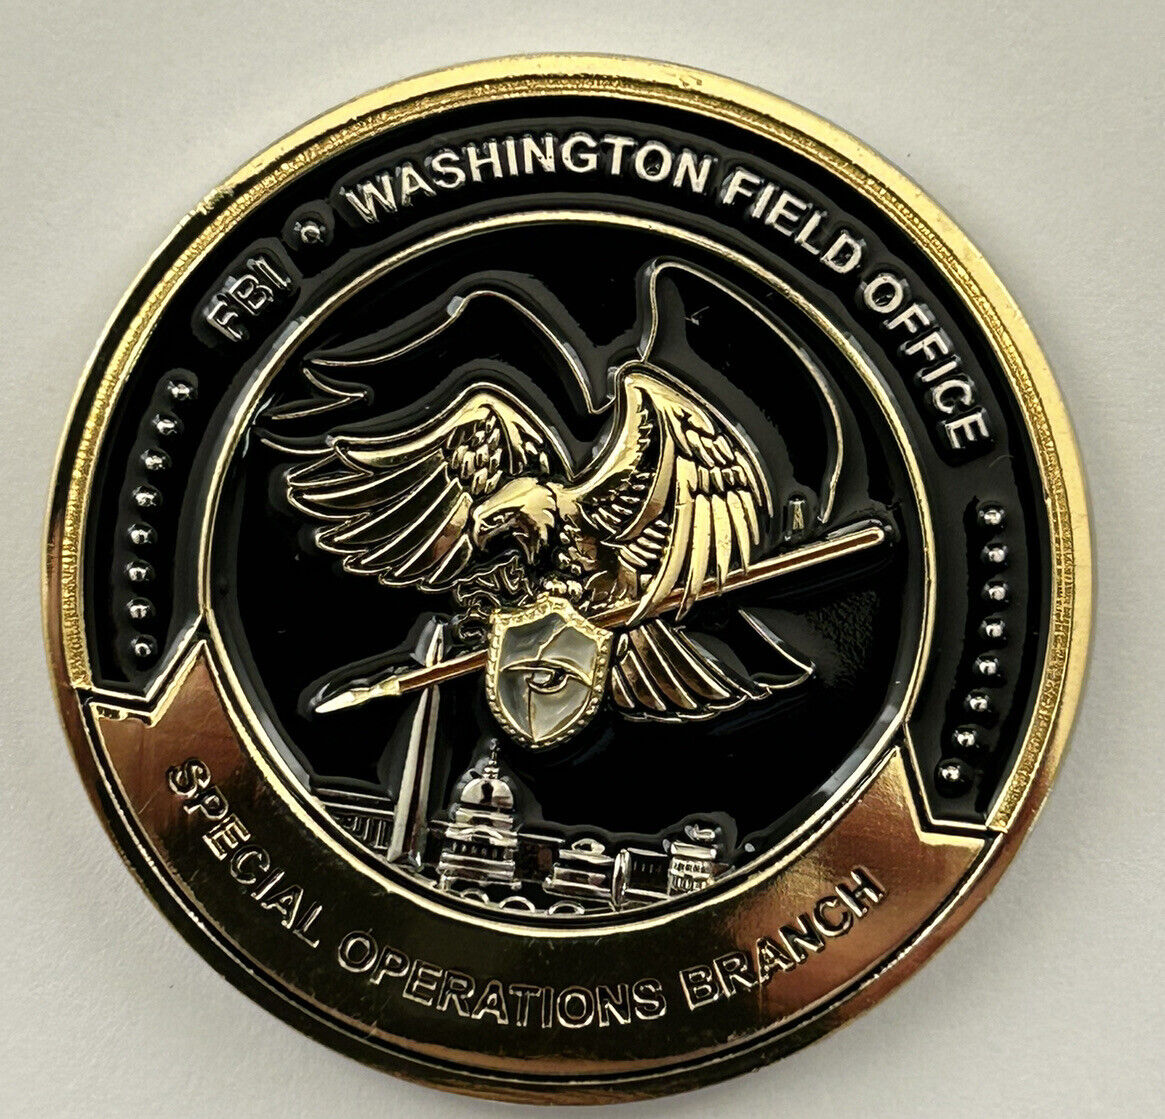 FBI WFO Washington Field Office Division Special Operations SWAT Challenge Coin